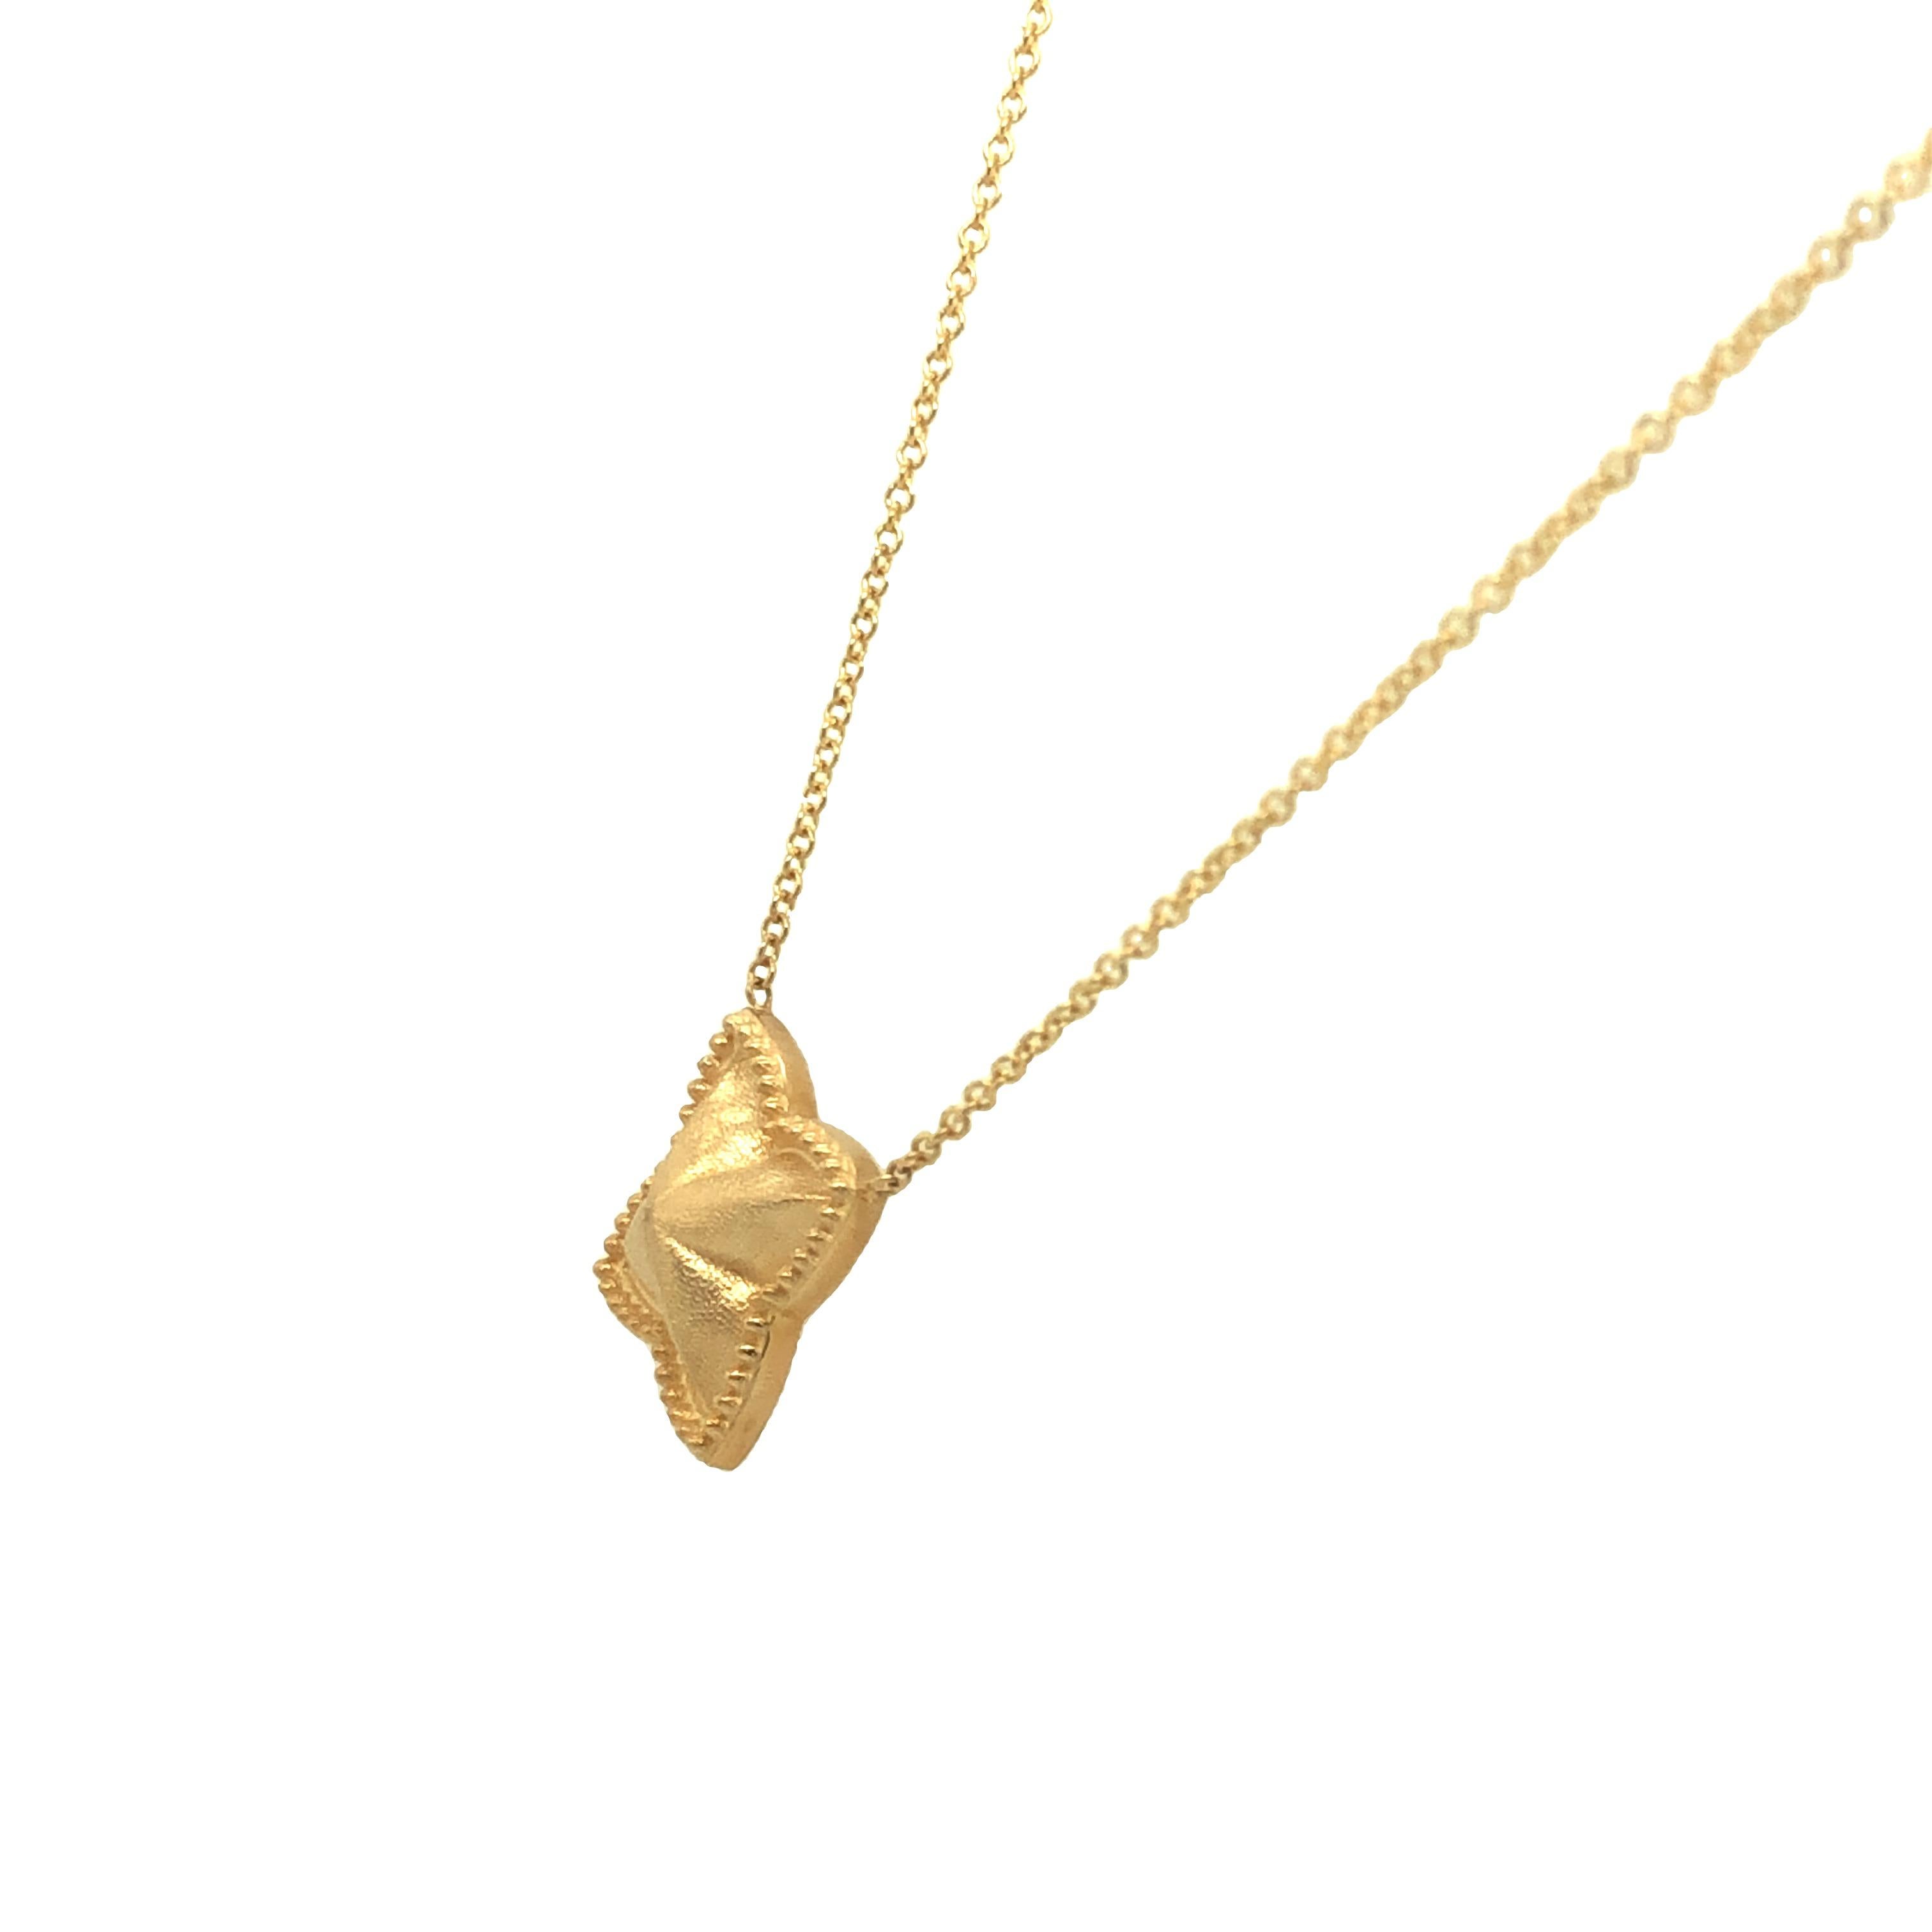 Contemporary Gems Are Forever Floral Emblem Necklace in 14k Yellow Gold For Sale